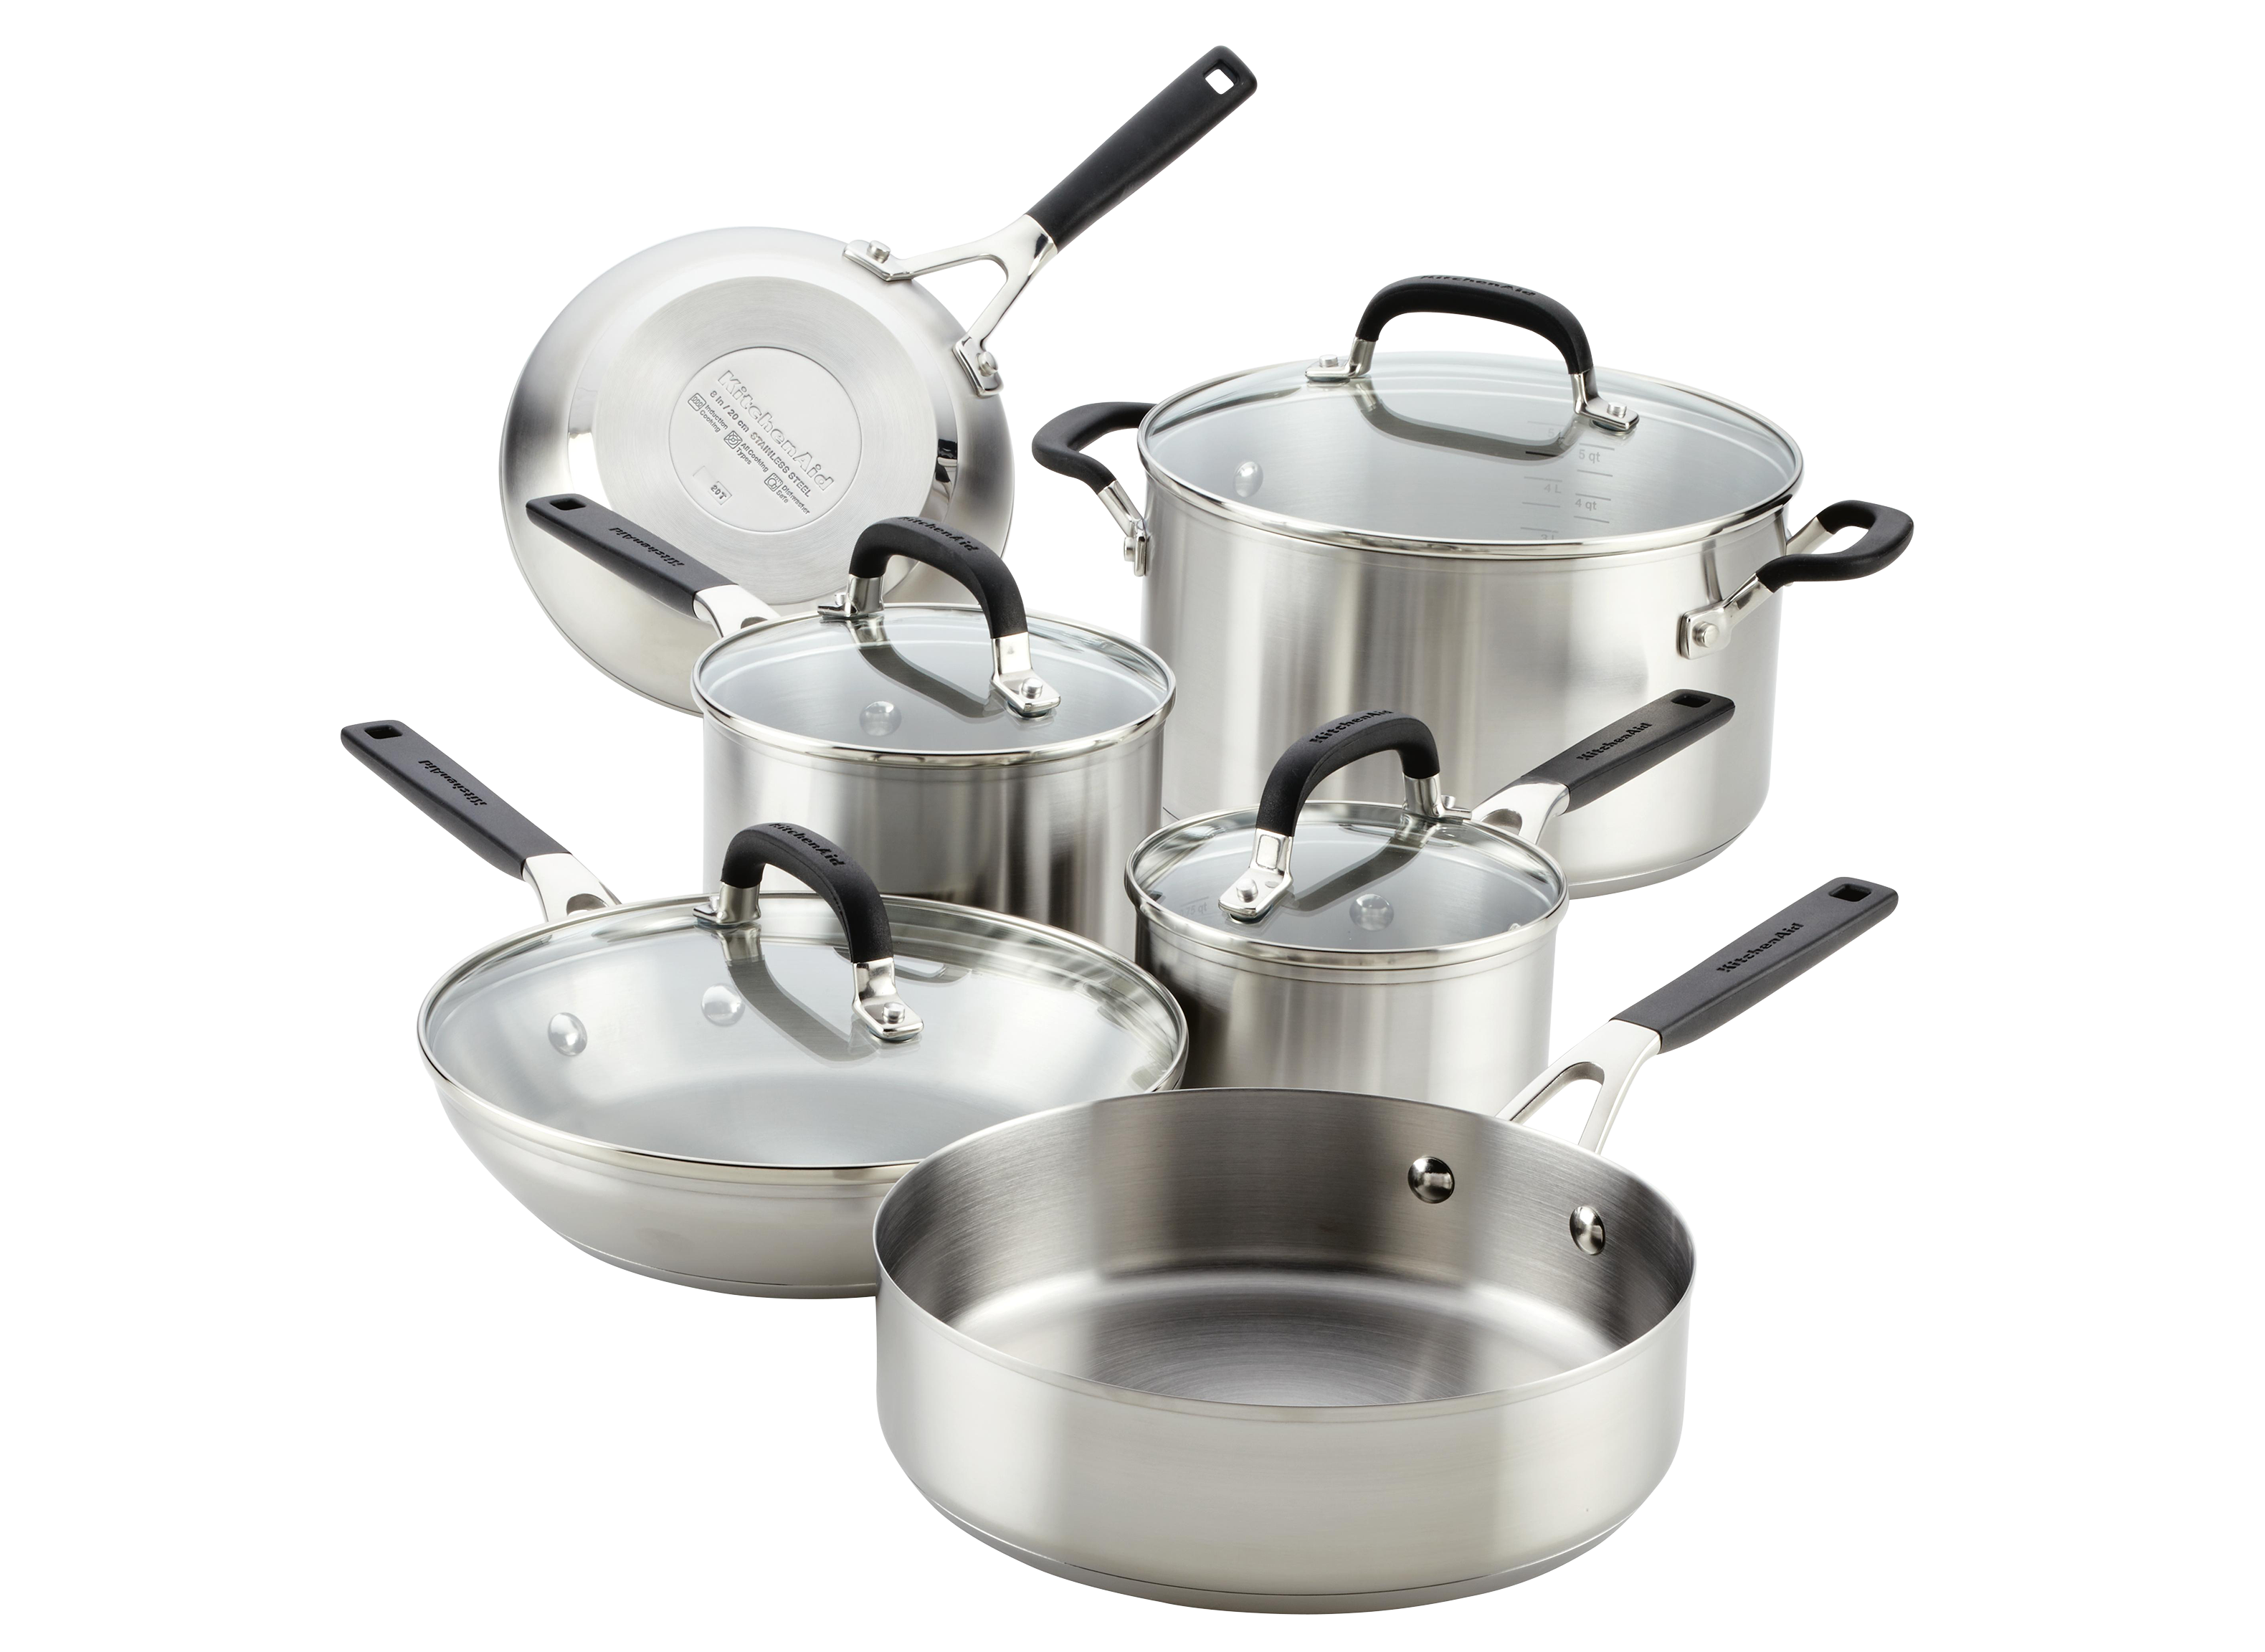 https://crdms.images.consumerreports.org/prod/products/cr/models/407519-cookware-sets-stainless-steel-kitchenaid-stainless-steel-10031591.png